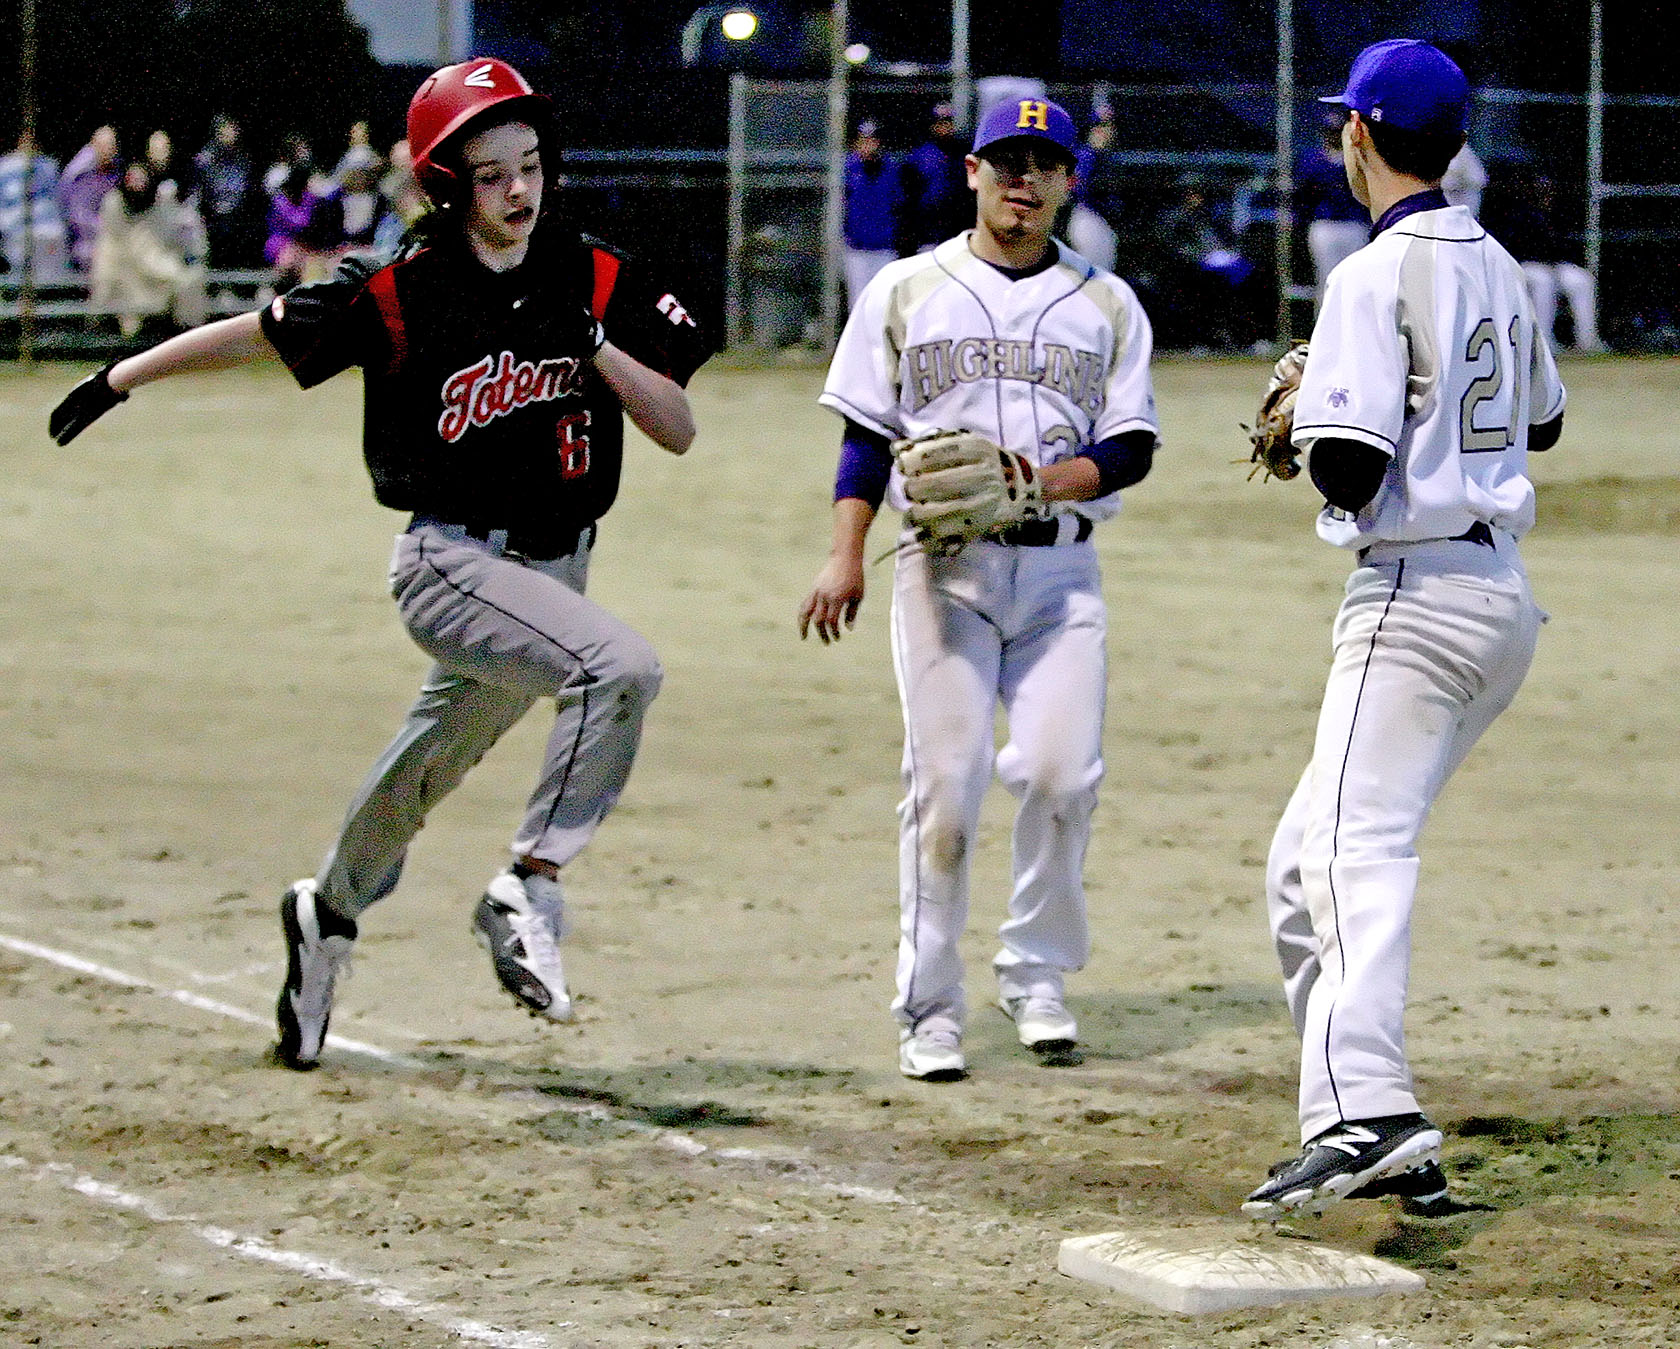 Jeremiah France of Highline touches 1st base just before Tyee's Jeremiah France reaches the bag.